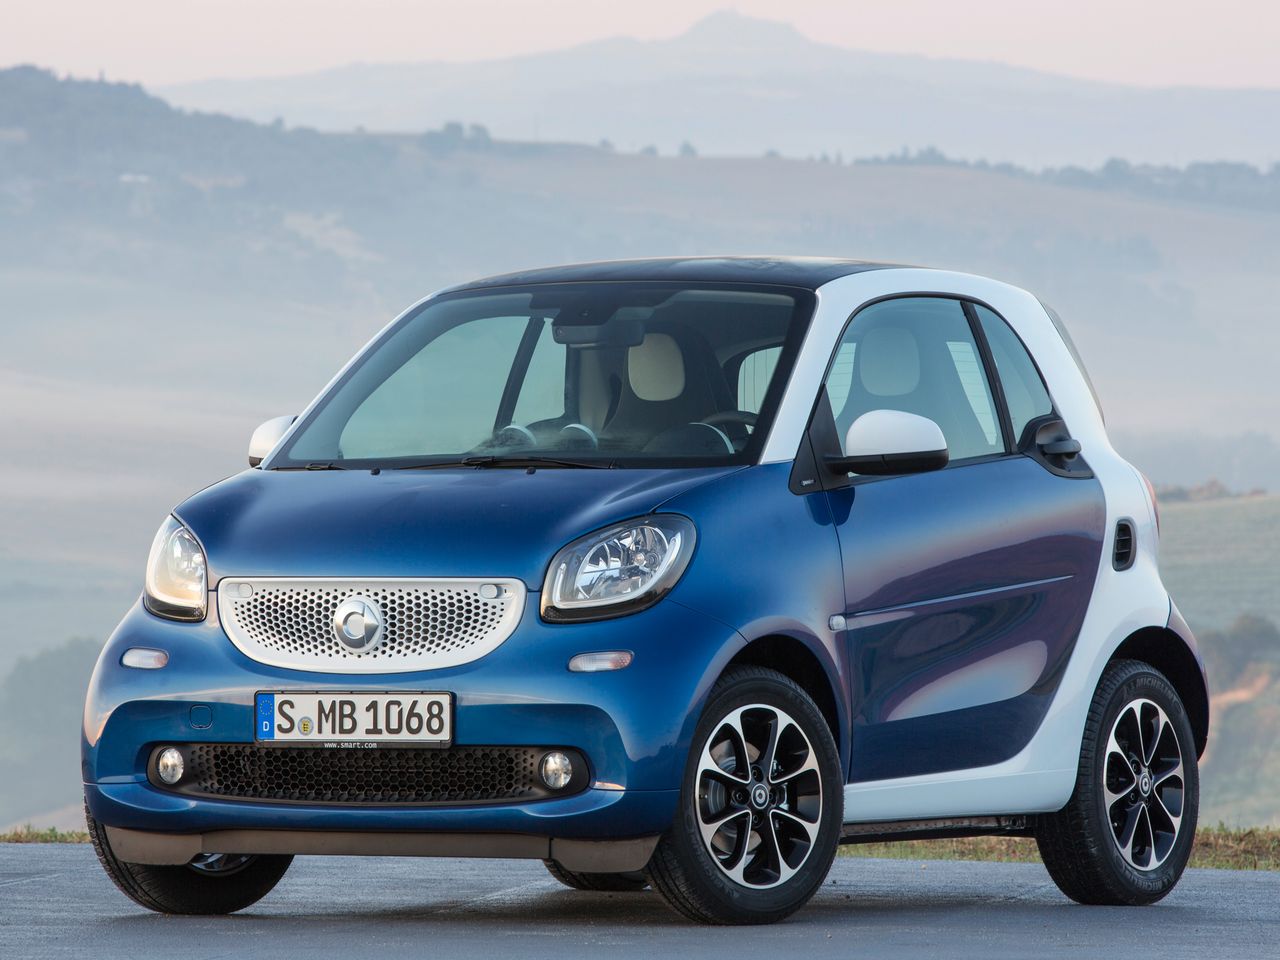 [h2]Smart ForTwo[/h2]